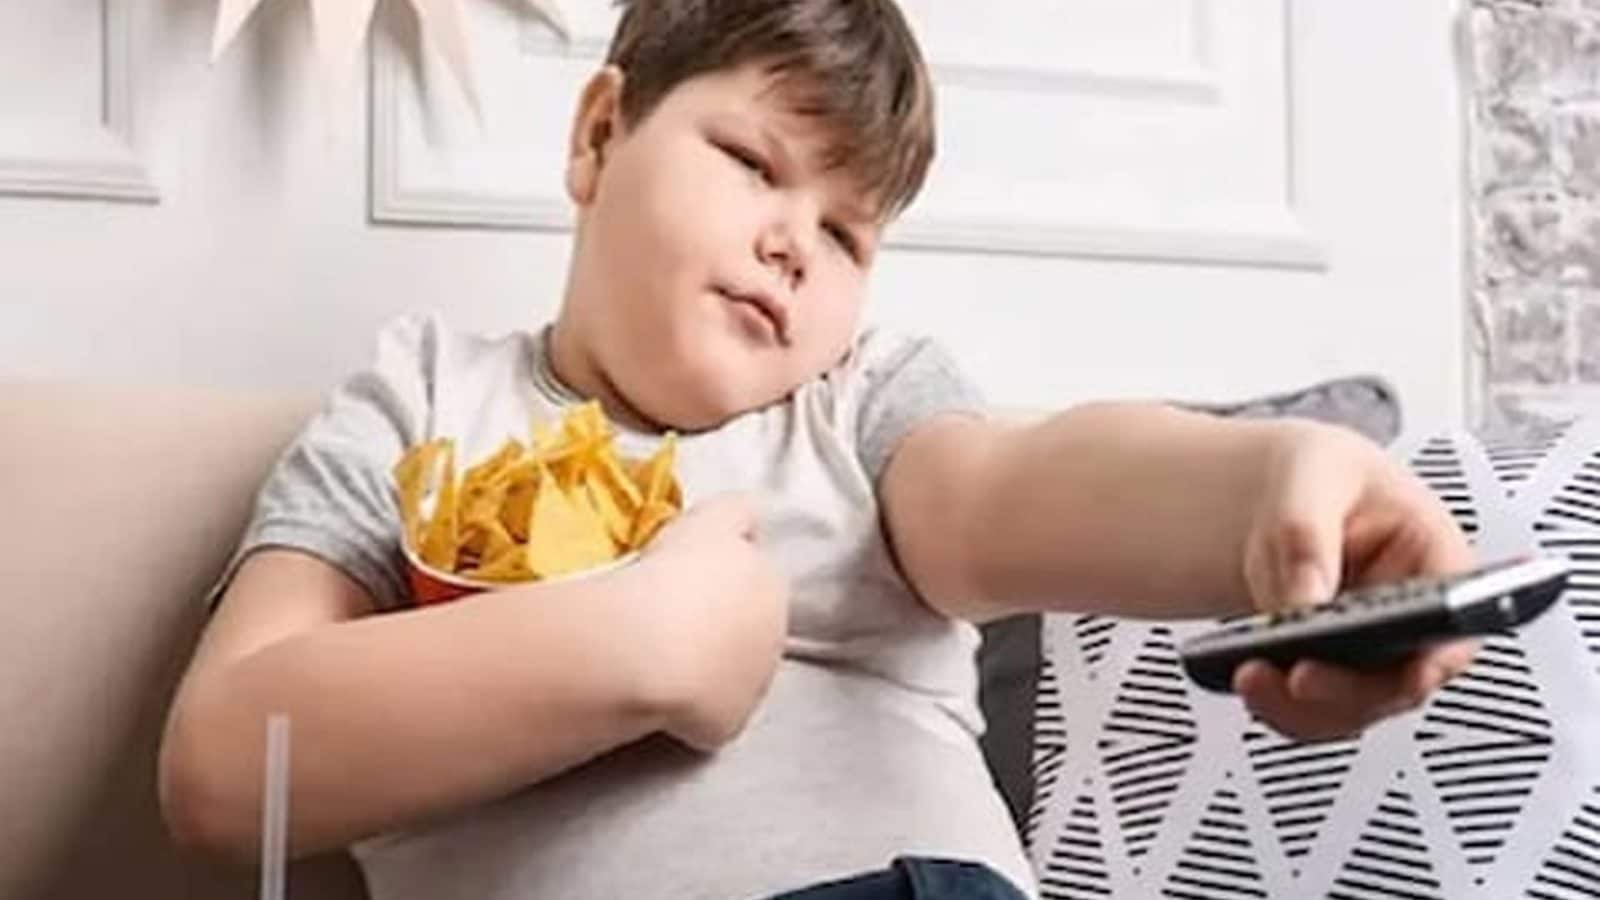 Abide By These 4 Tips To Prevent Obesity In Childhood